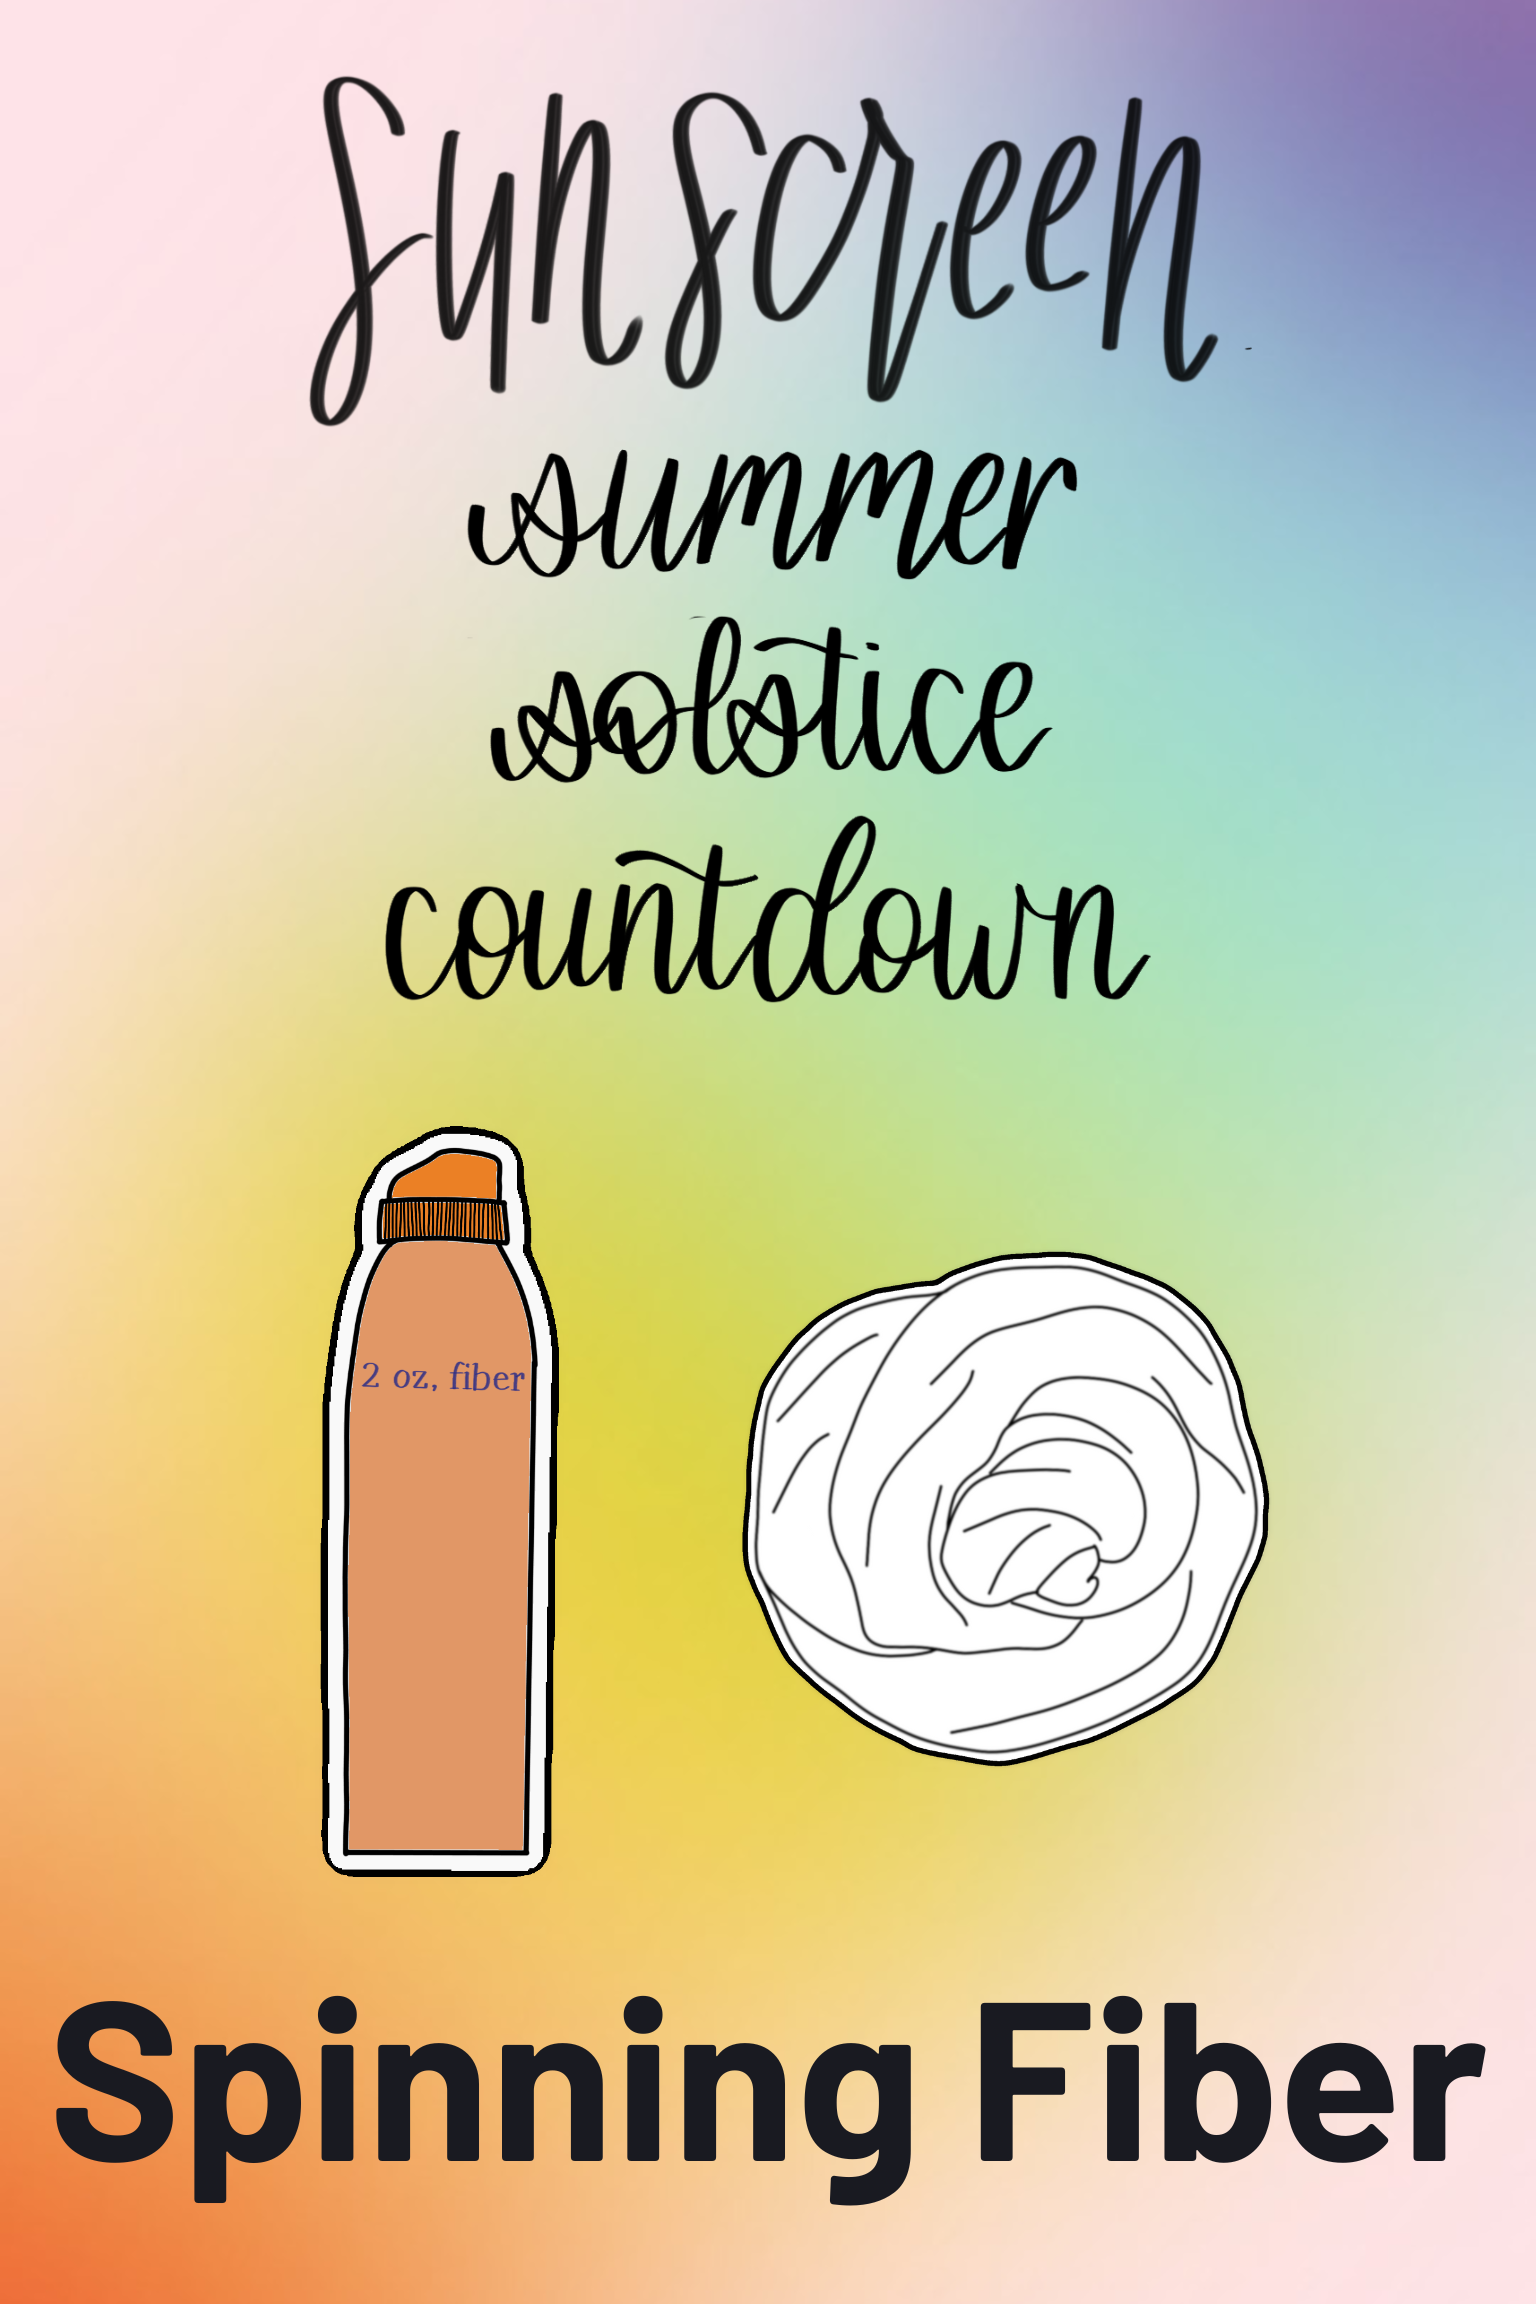 A rainbow gradient with an illustration of a sunscreen bottle and a ball of fiber and the words "Sunscreen Summer Solstice Countdown" and "Spinning Fiber"